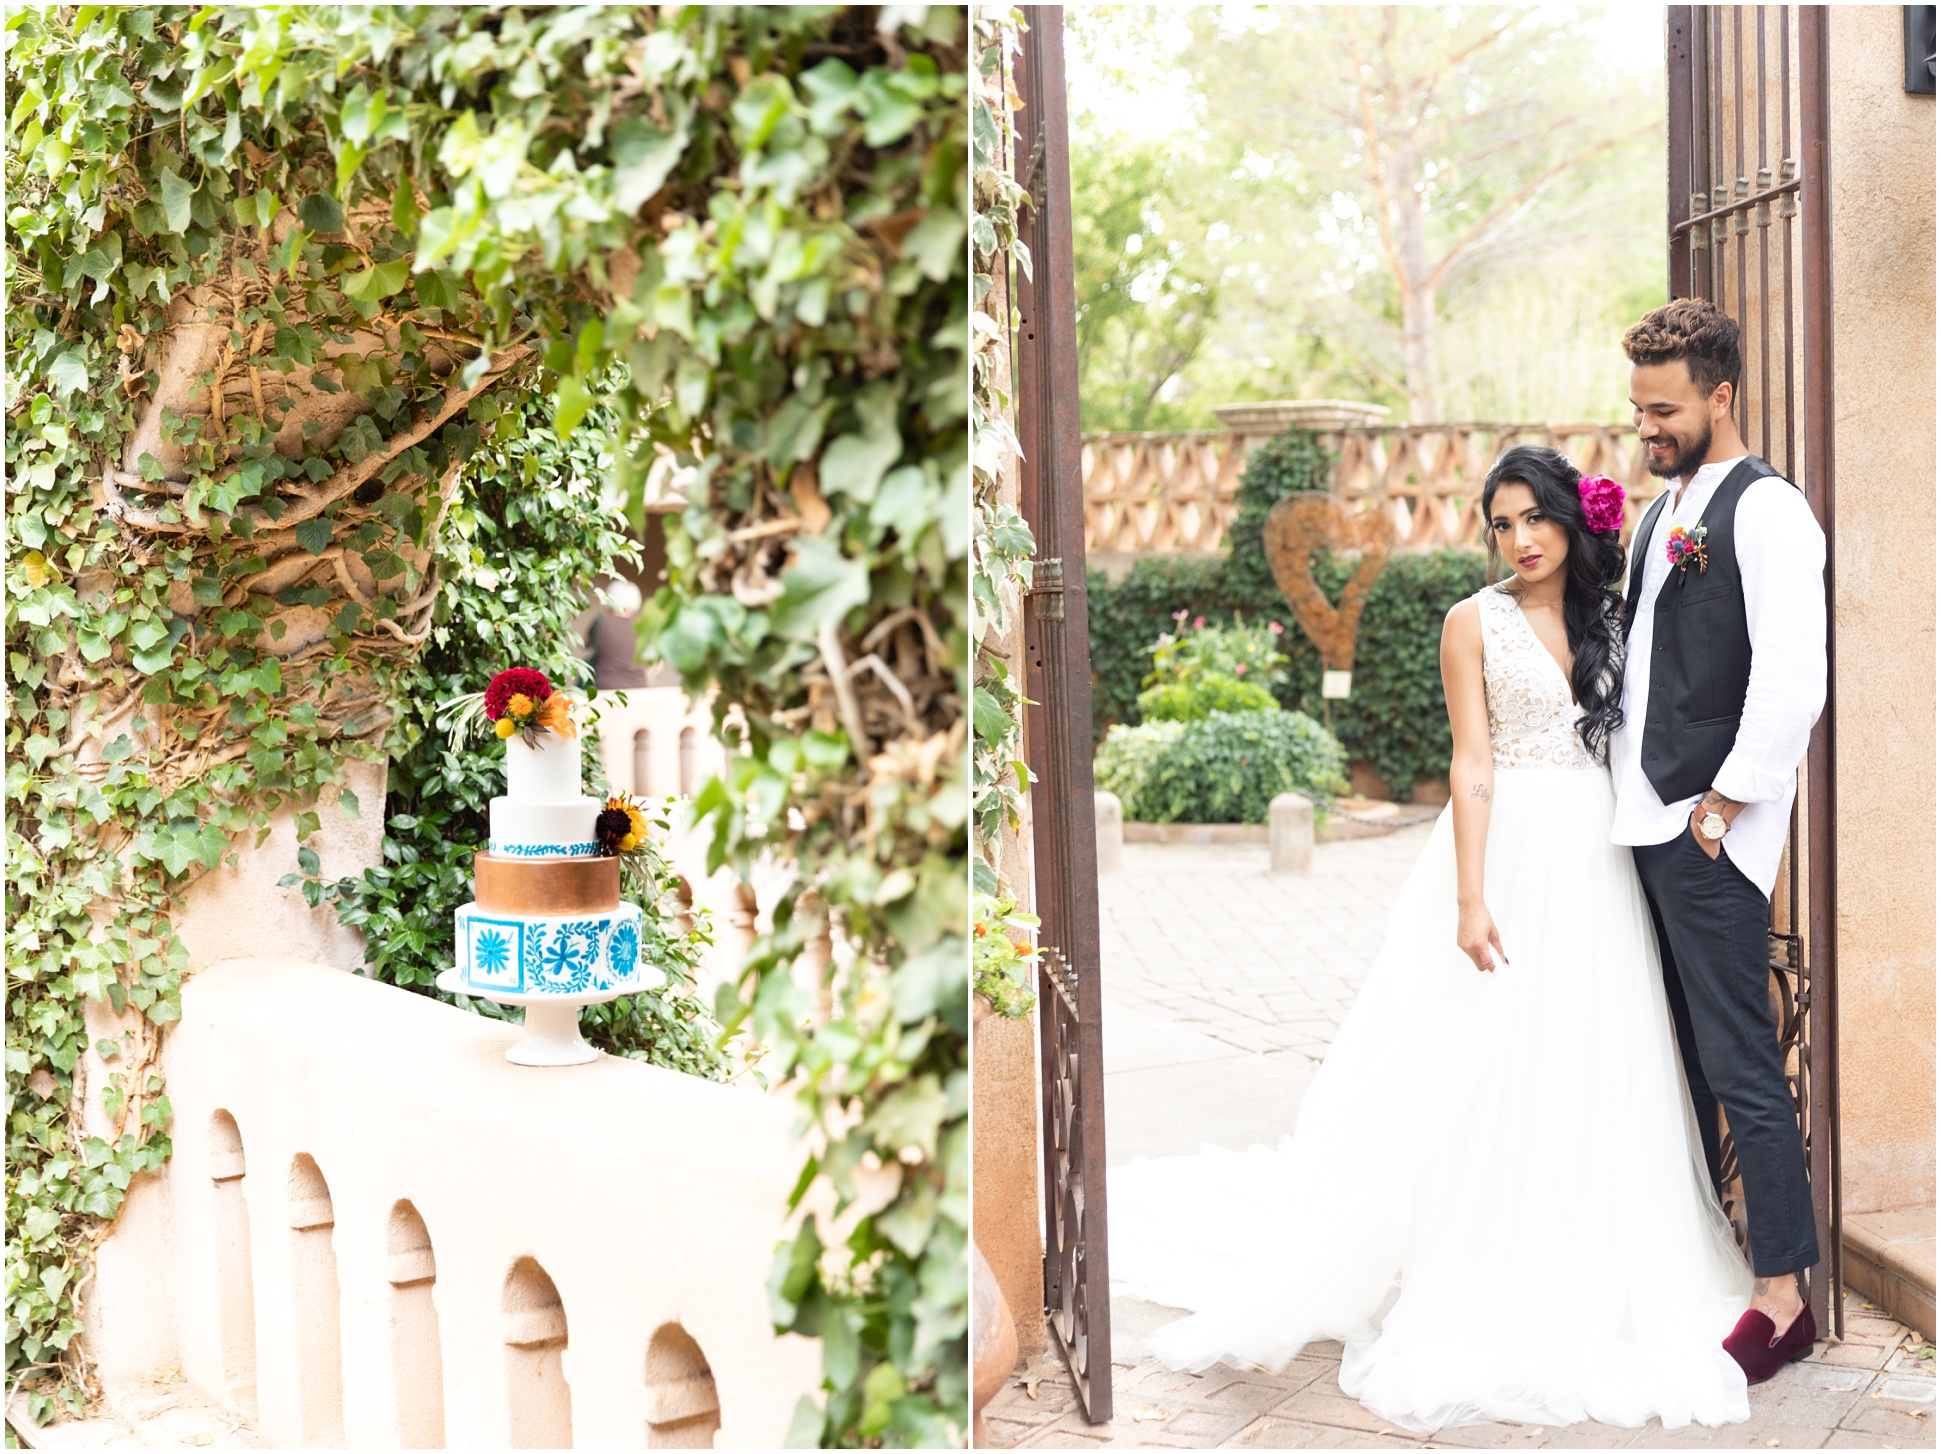 Spanish Inspired Styled Shoot at Tlaquepaque in Sedona